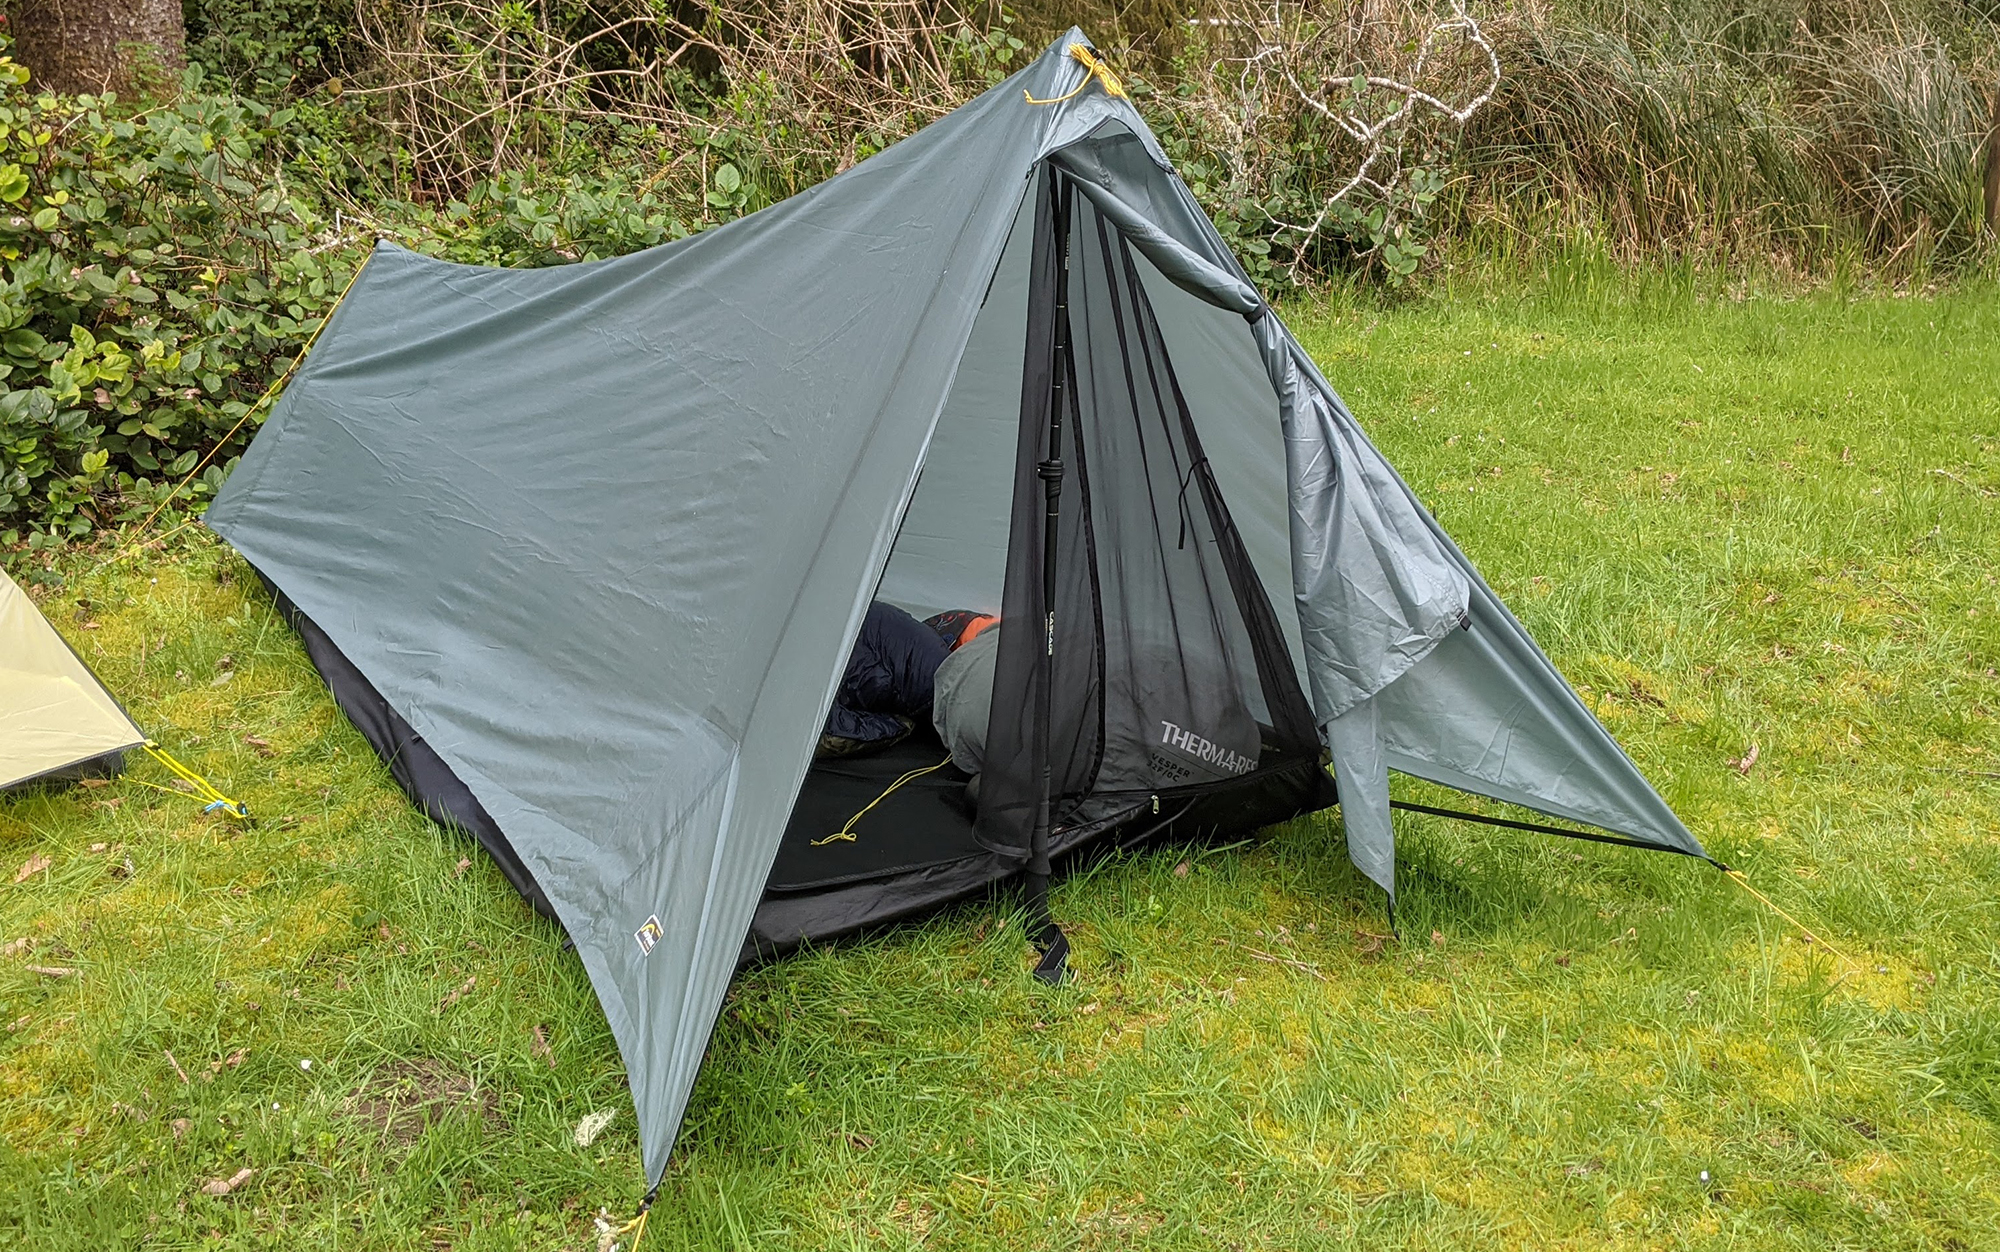 Our tester did not love the head-in entry of the Tarptent Protrail, but the three and a half feet of height should make it doable for most individuals.